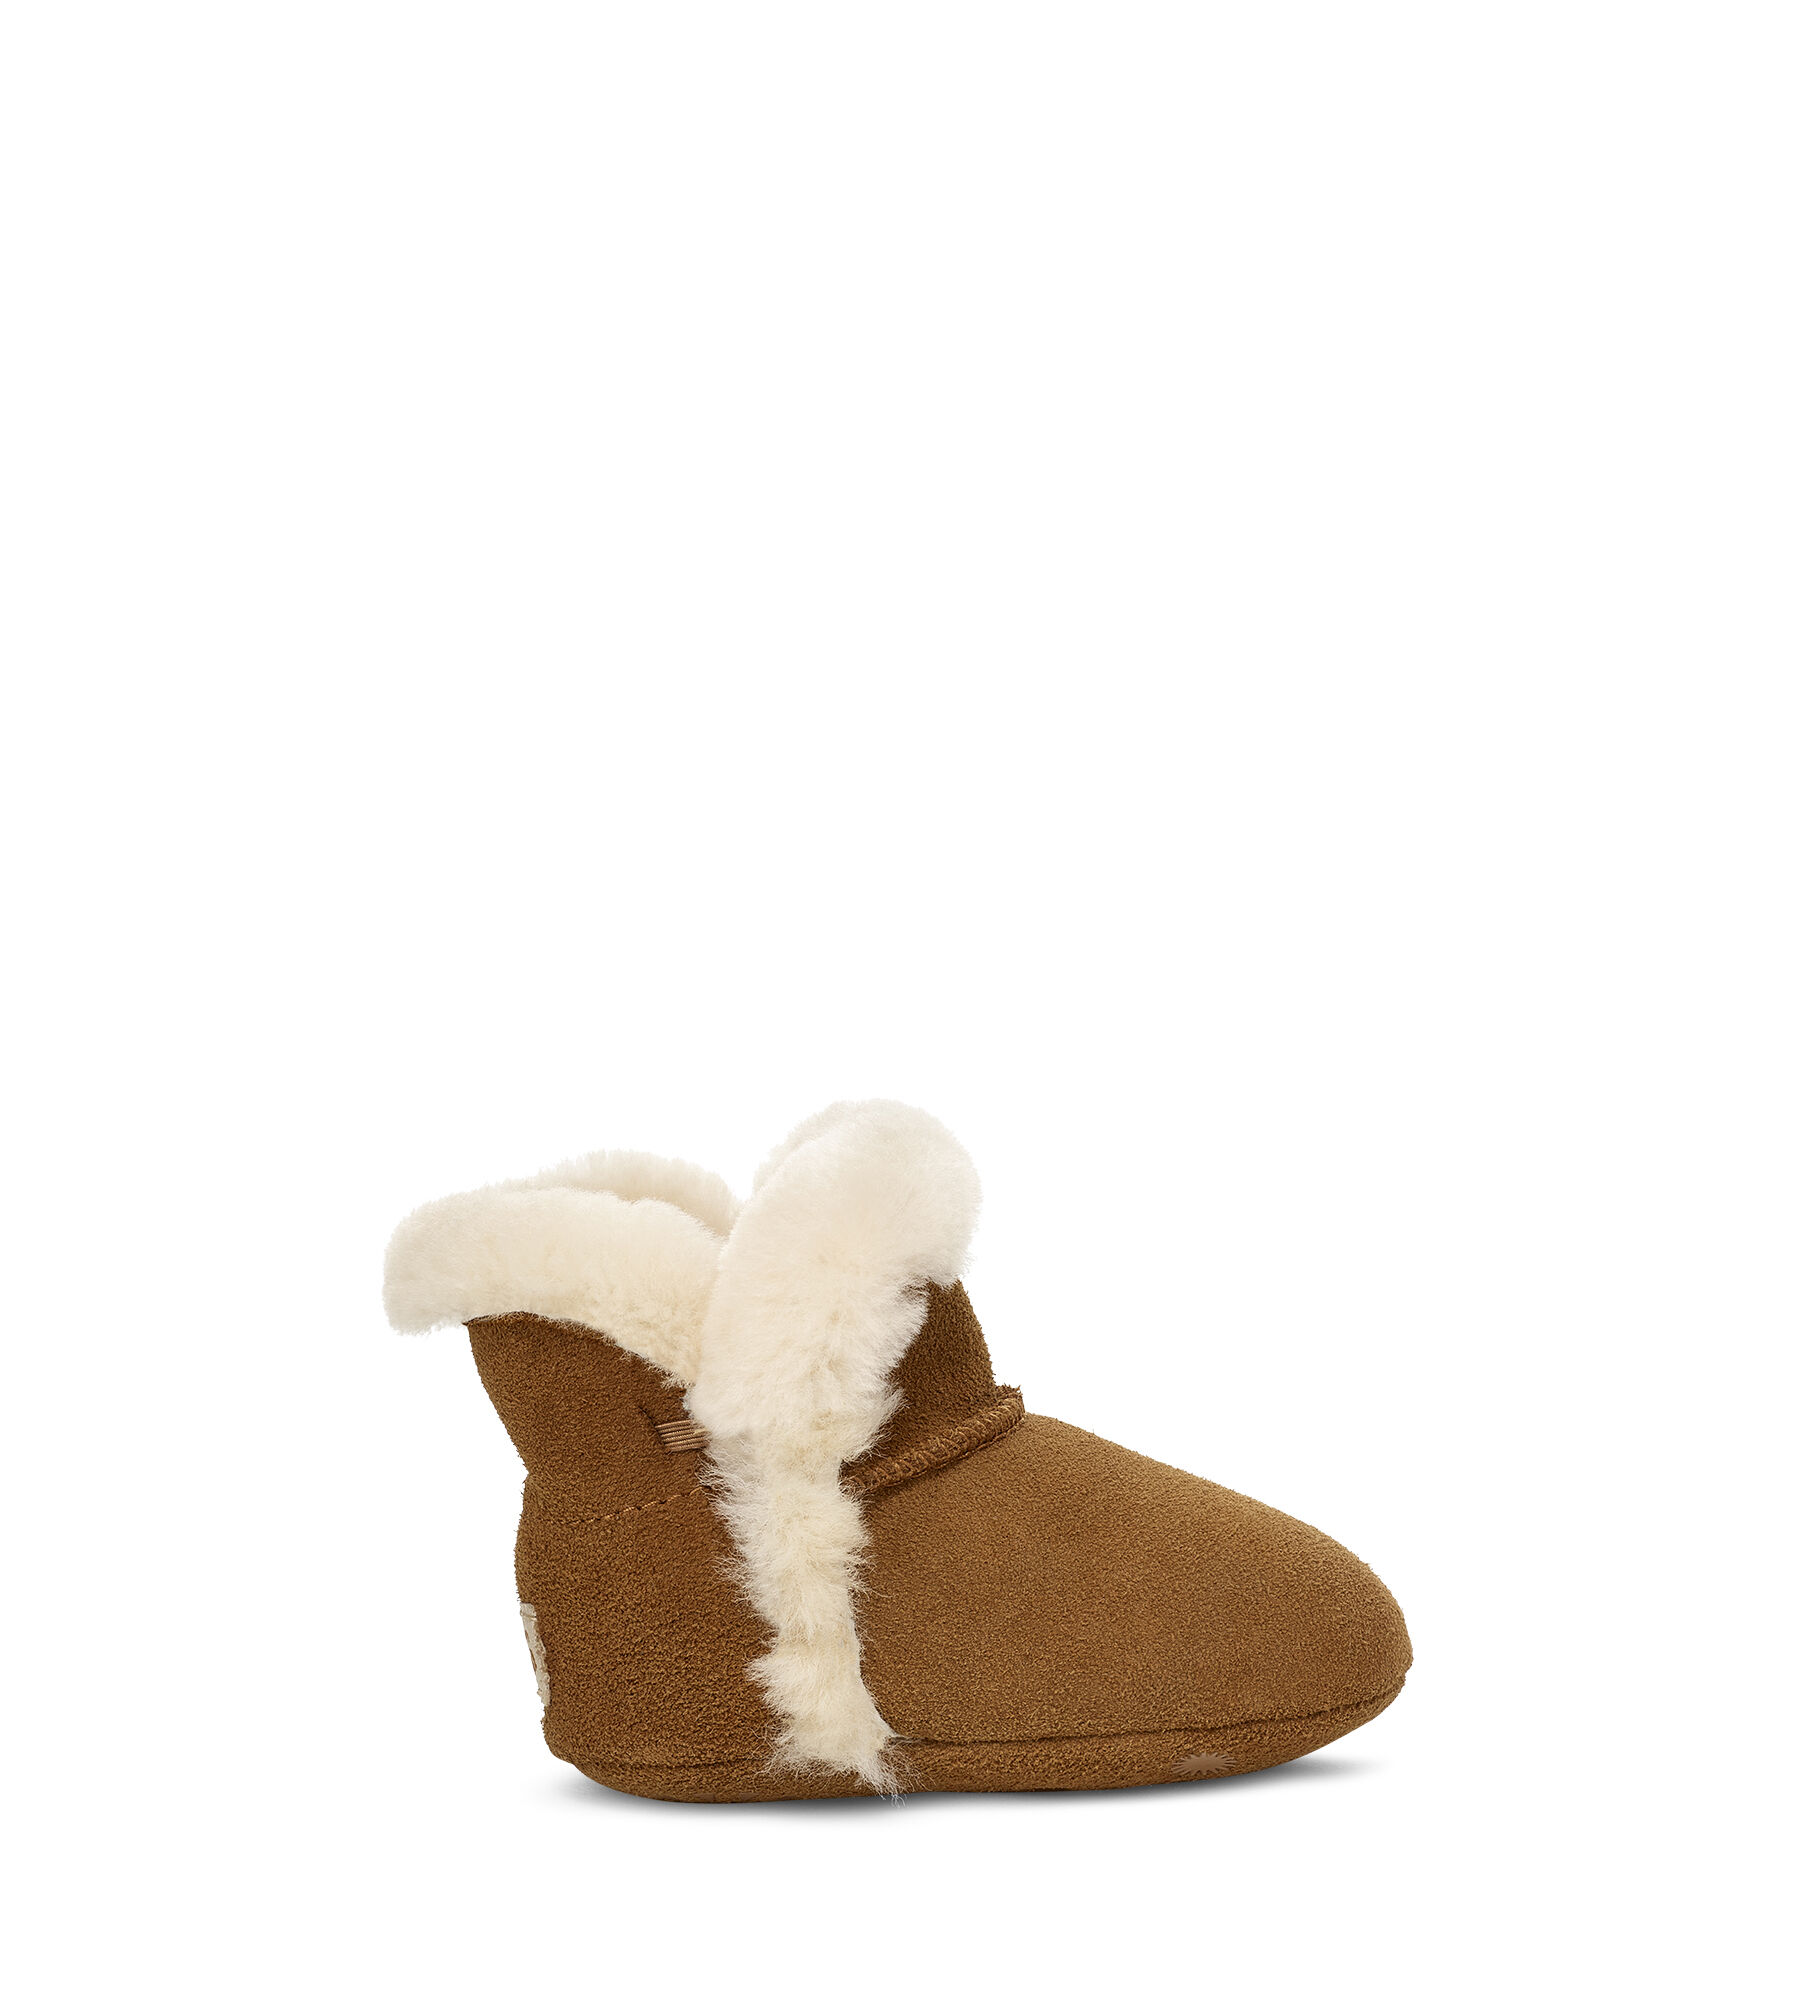 baby uggs small size chart